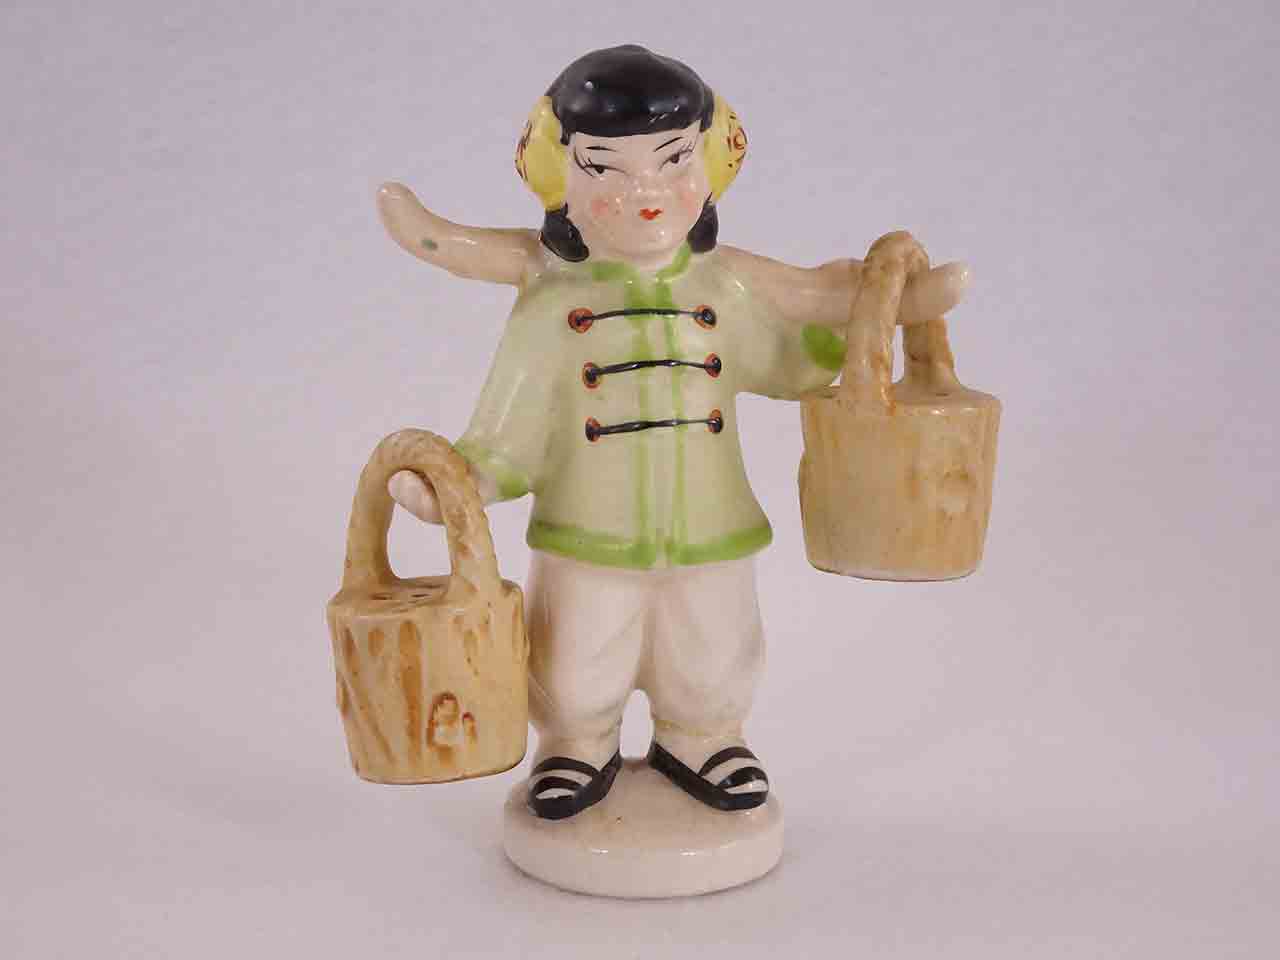 Occupied Japan Japanese Asian girl carrying pails - hanger salt and pepper shakers